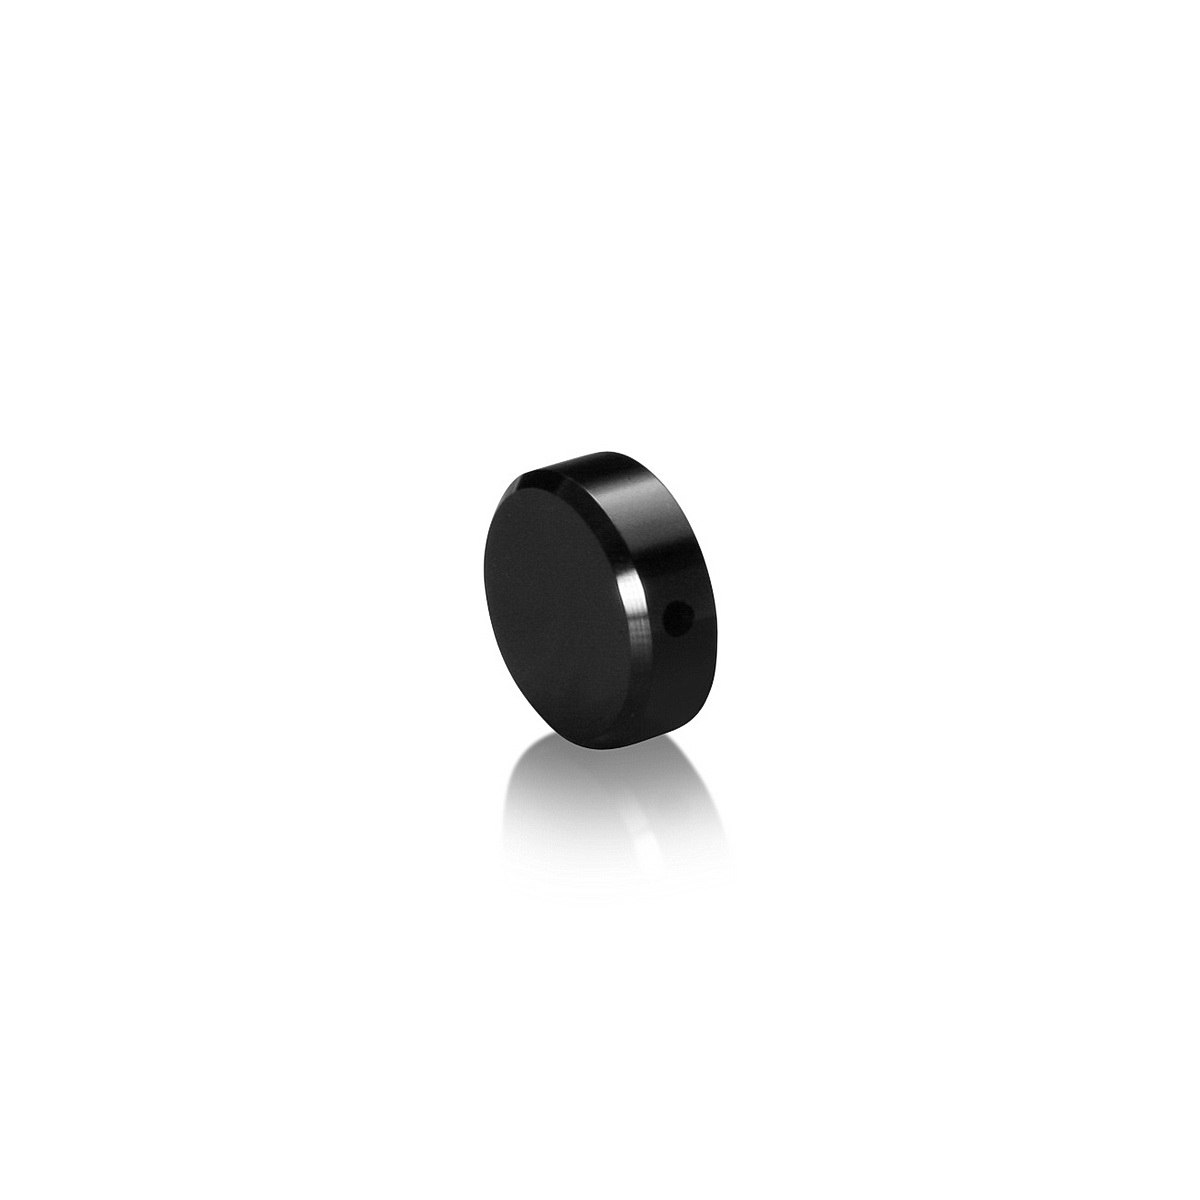 10-24 Threaded Locking Caps Diameter: 3/8'', Height: 1/4'', Black Anodized Aluminum [Required Material Hole Size: 7/32'']